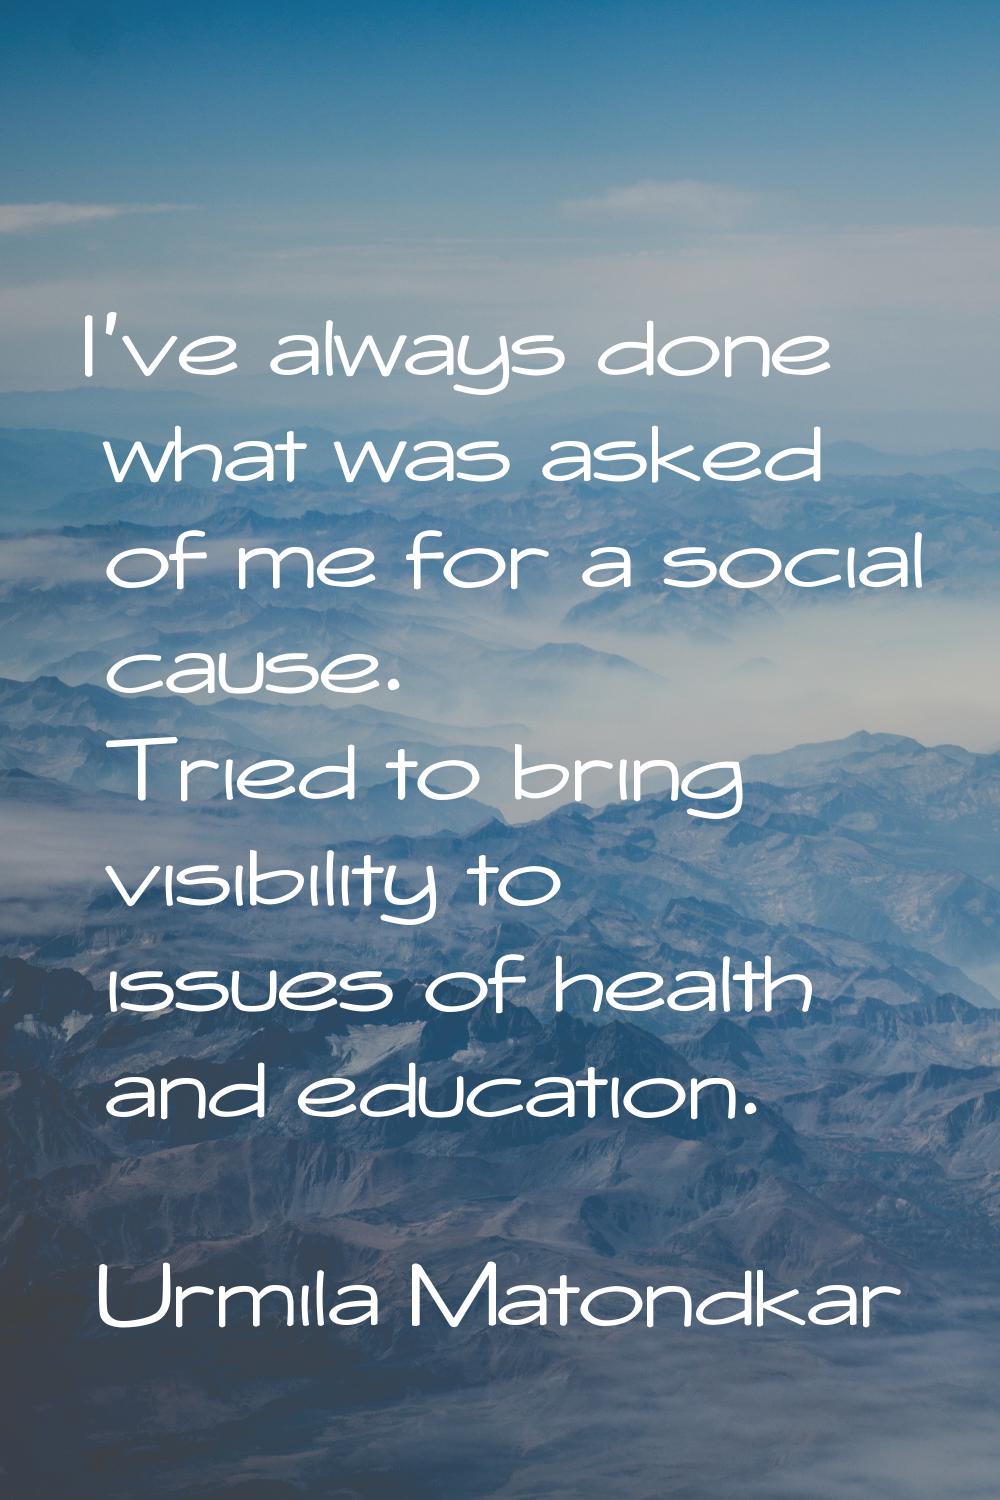 I've always done what was asked of me for a social cause. Tried to bring visibility to issues of he